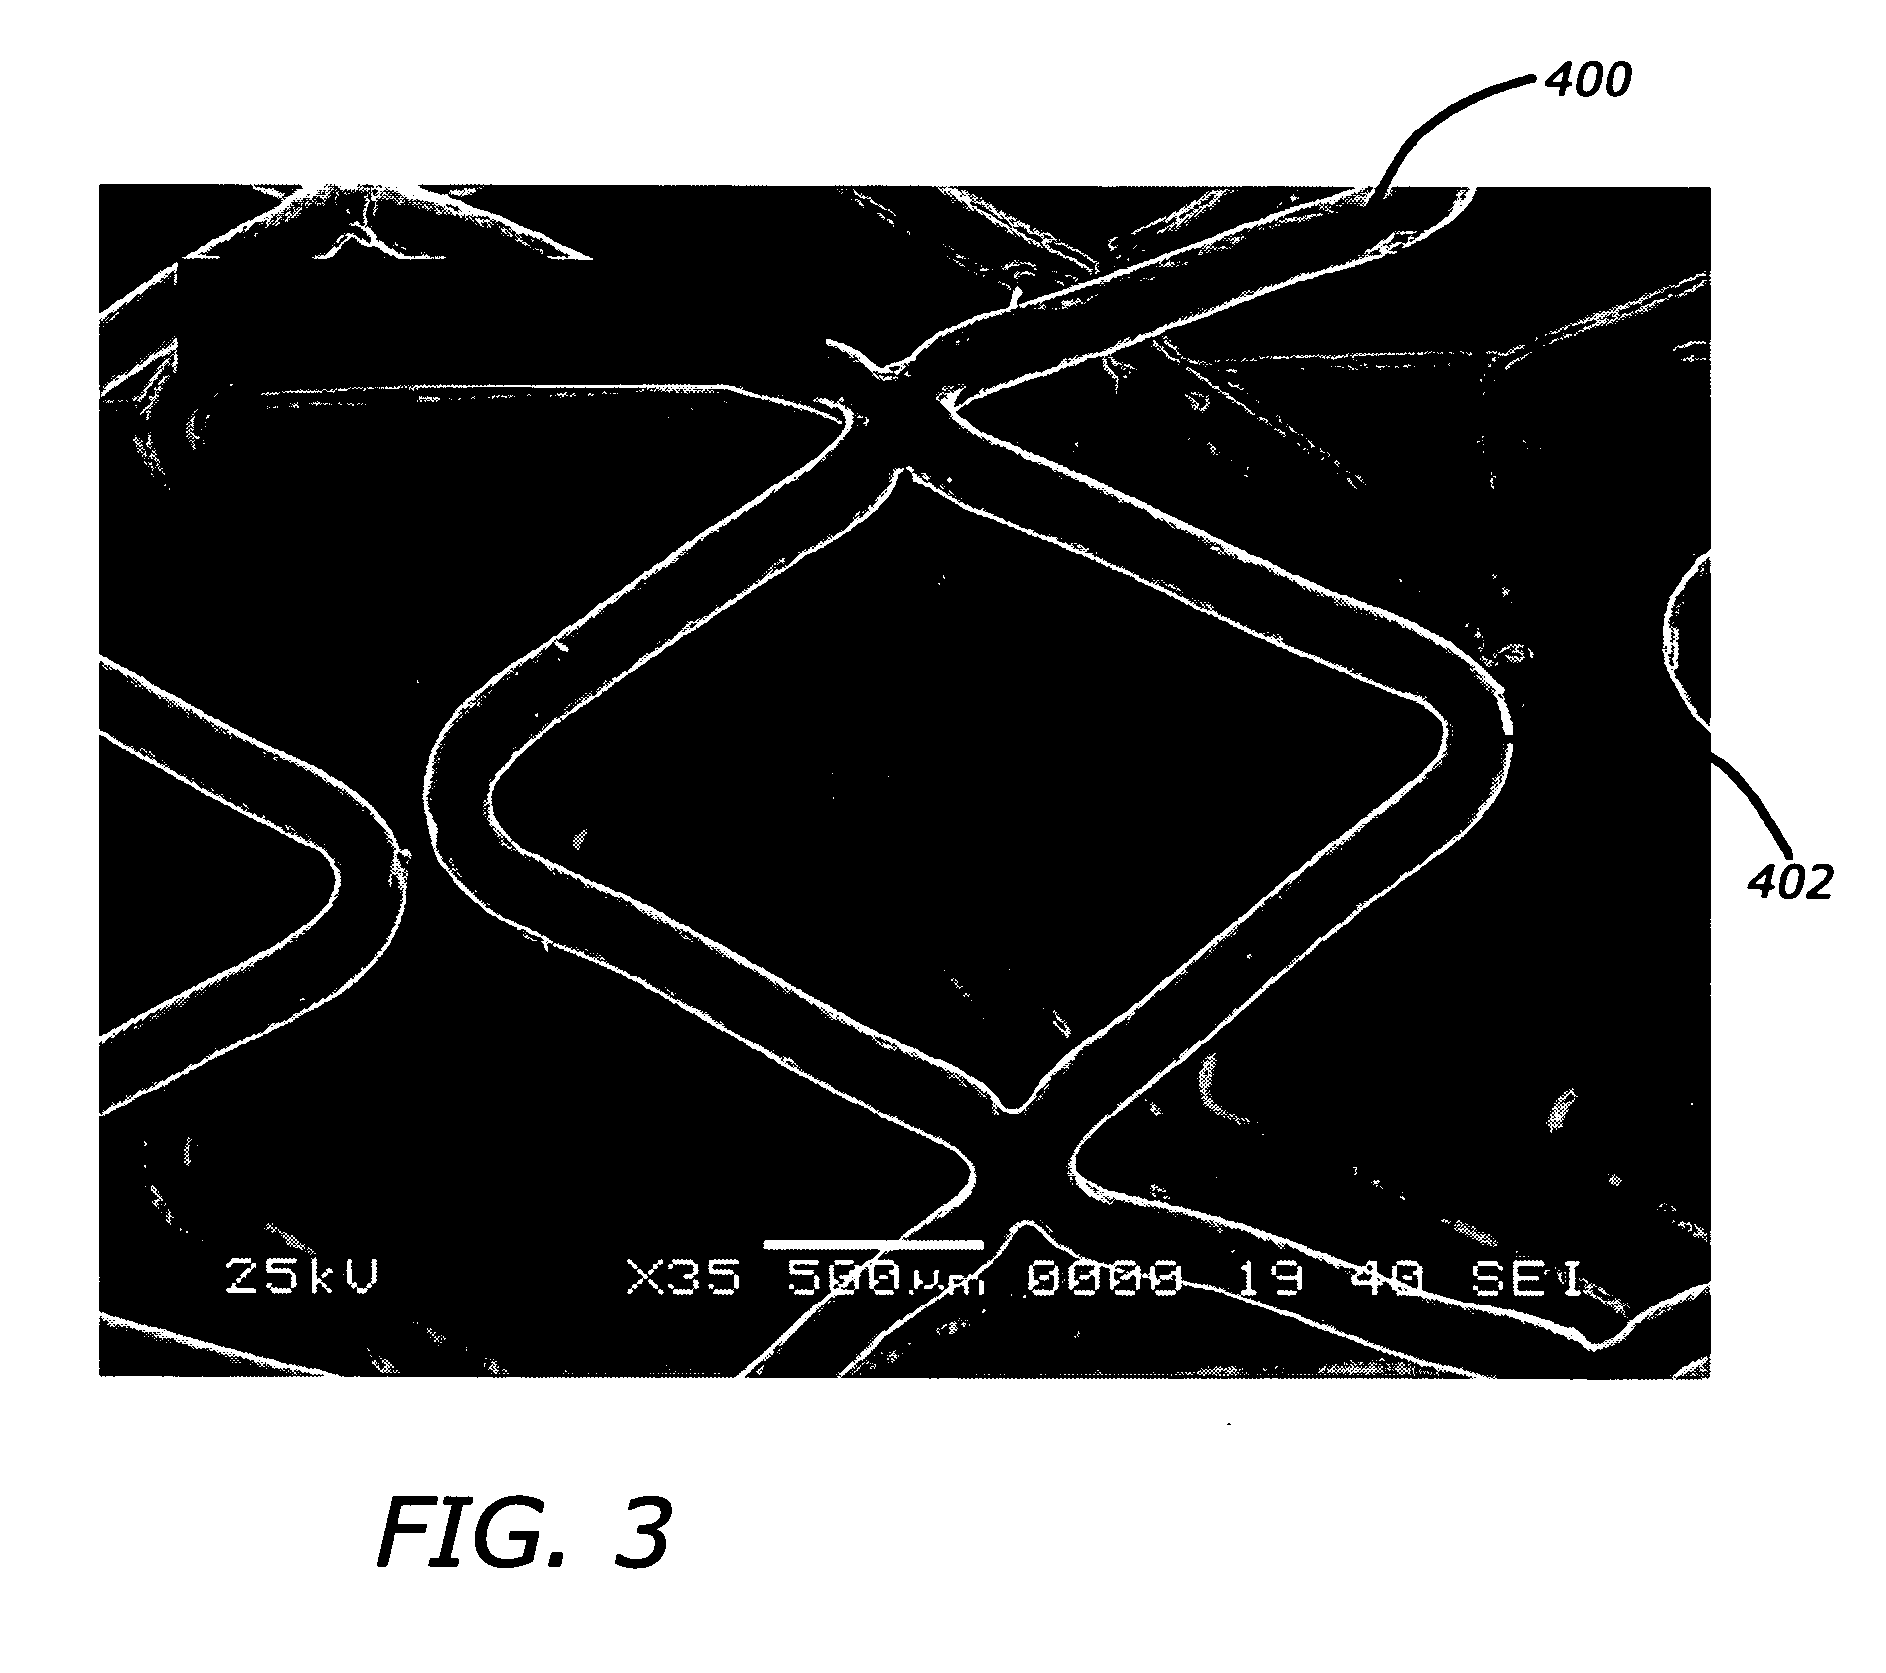 Biocompatible and hemocompatible polymer compositions